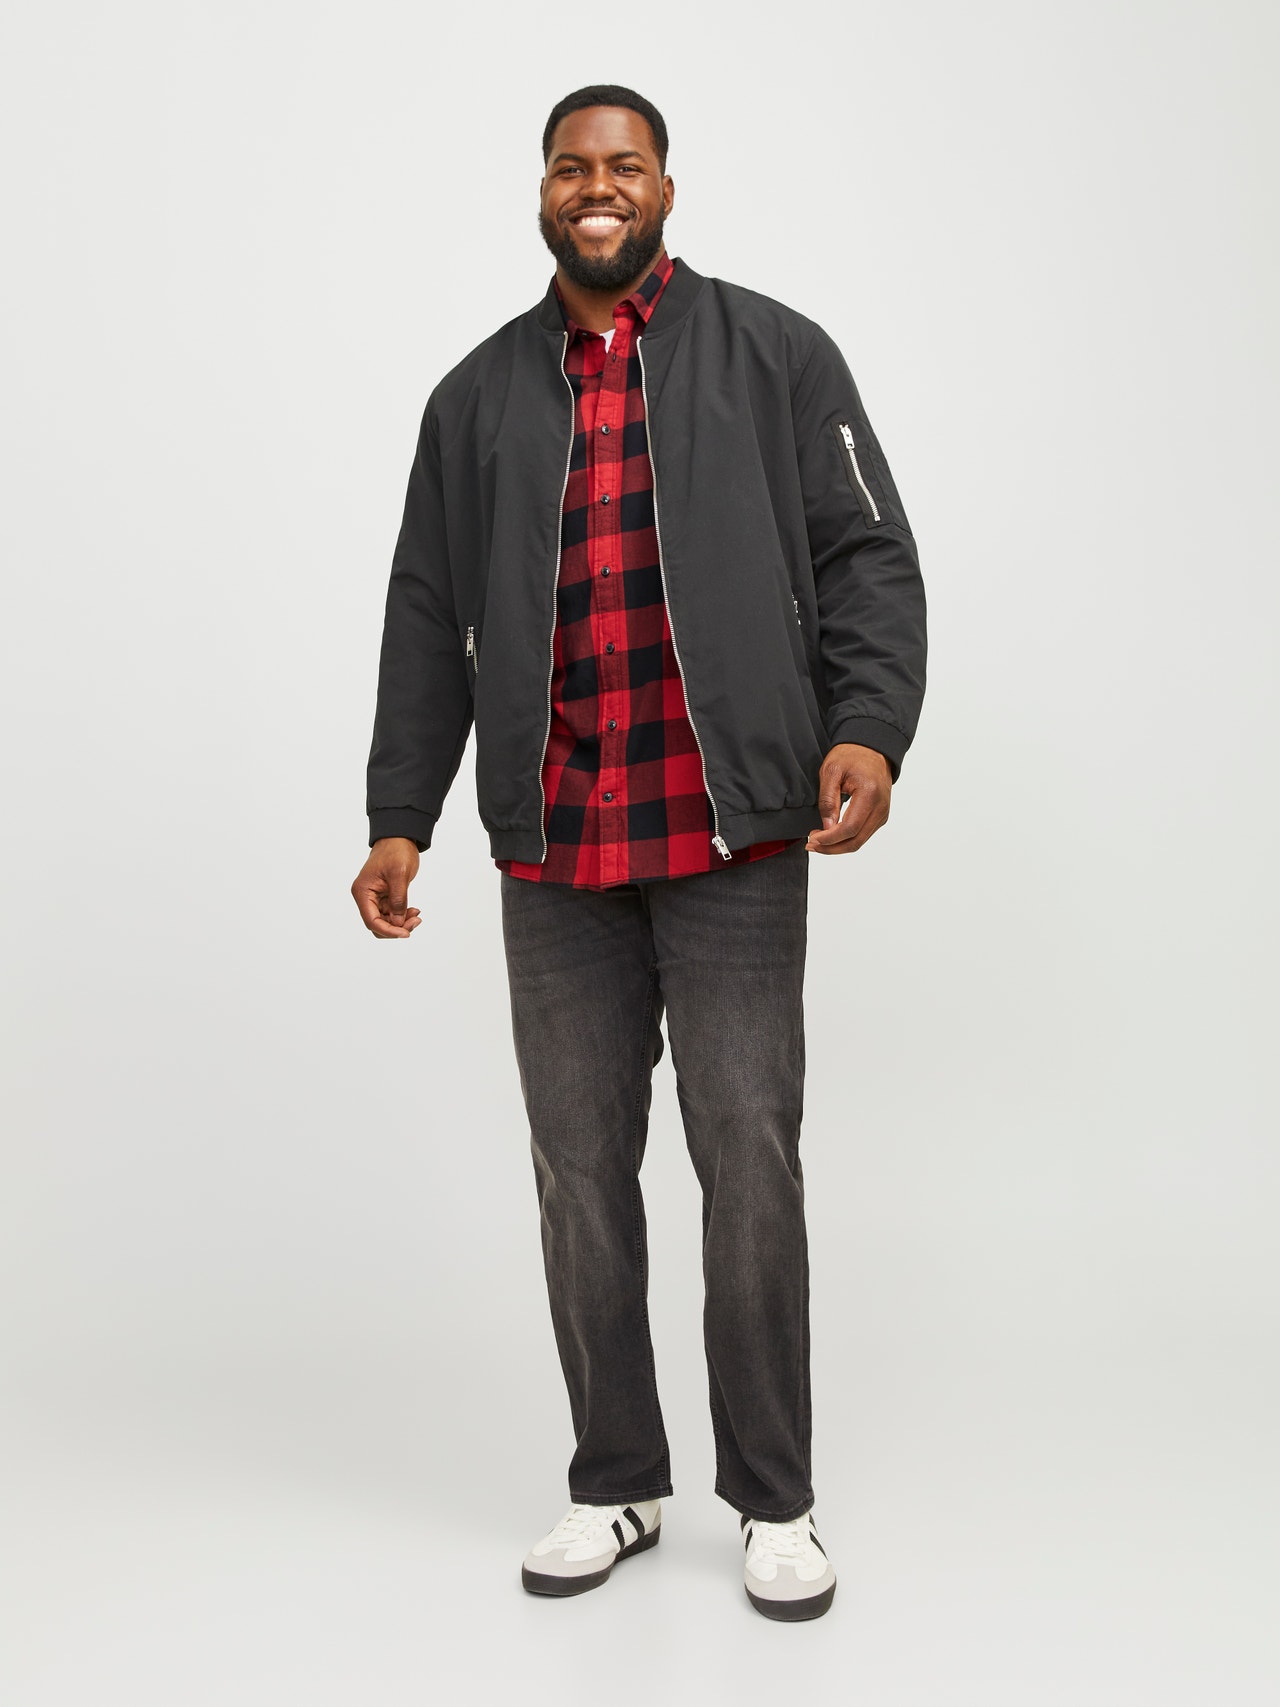 Jack & Jones Plus Size Loose Fit Checked shirt -Brick Red - 12183107